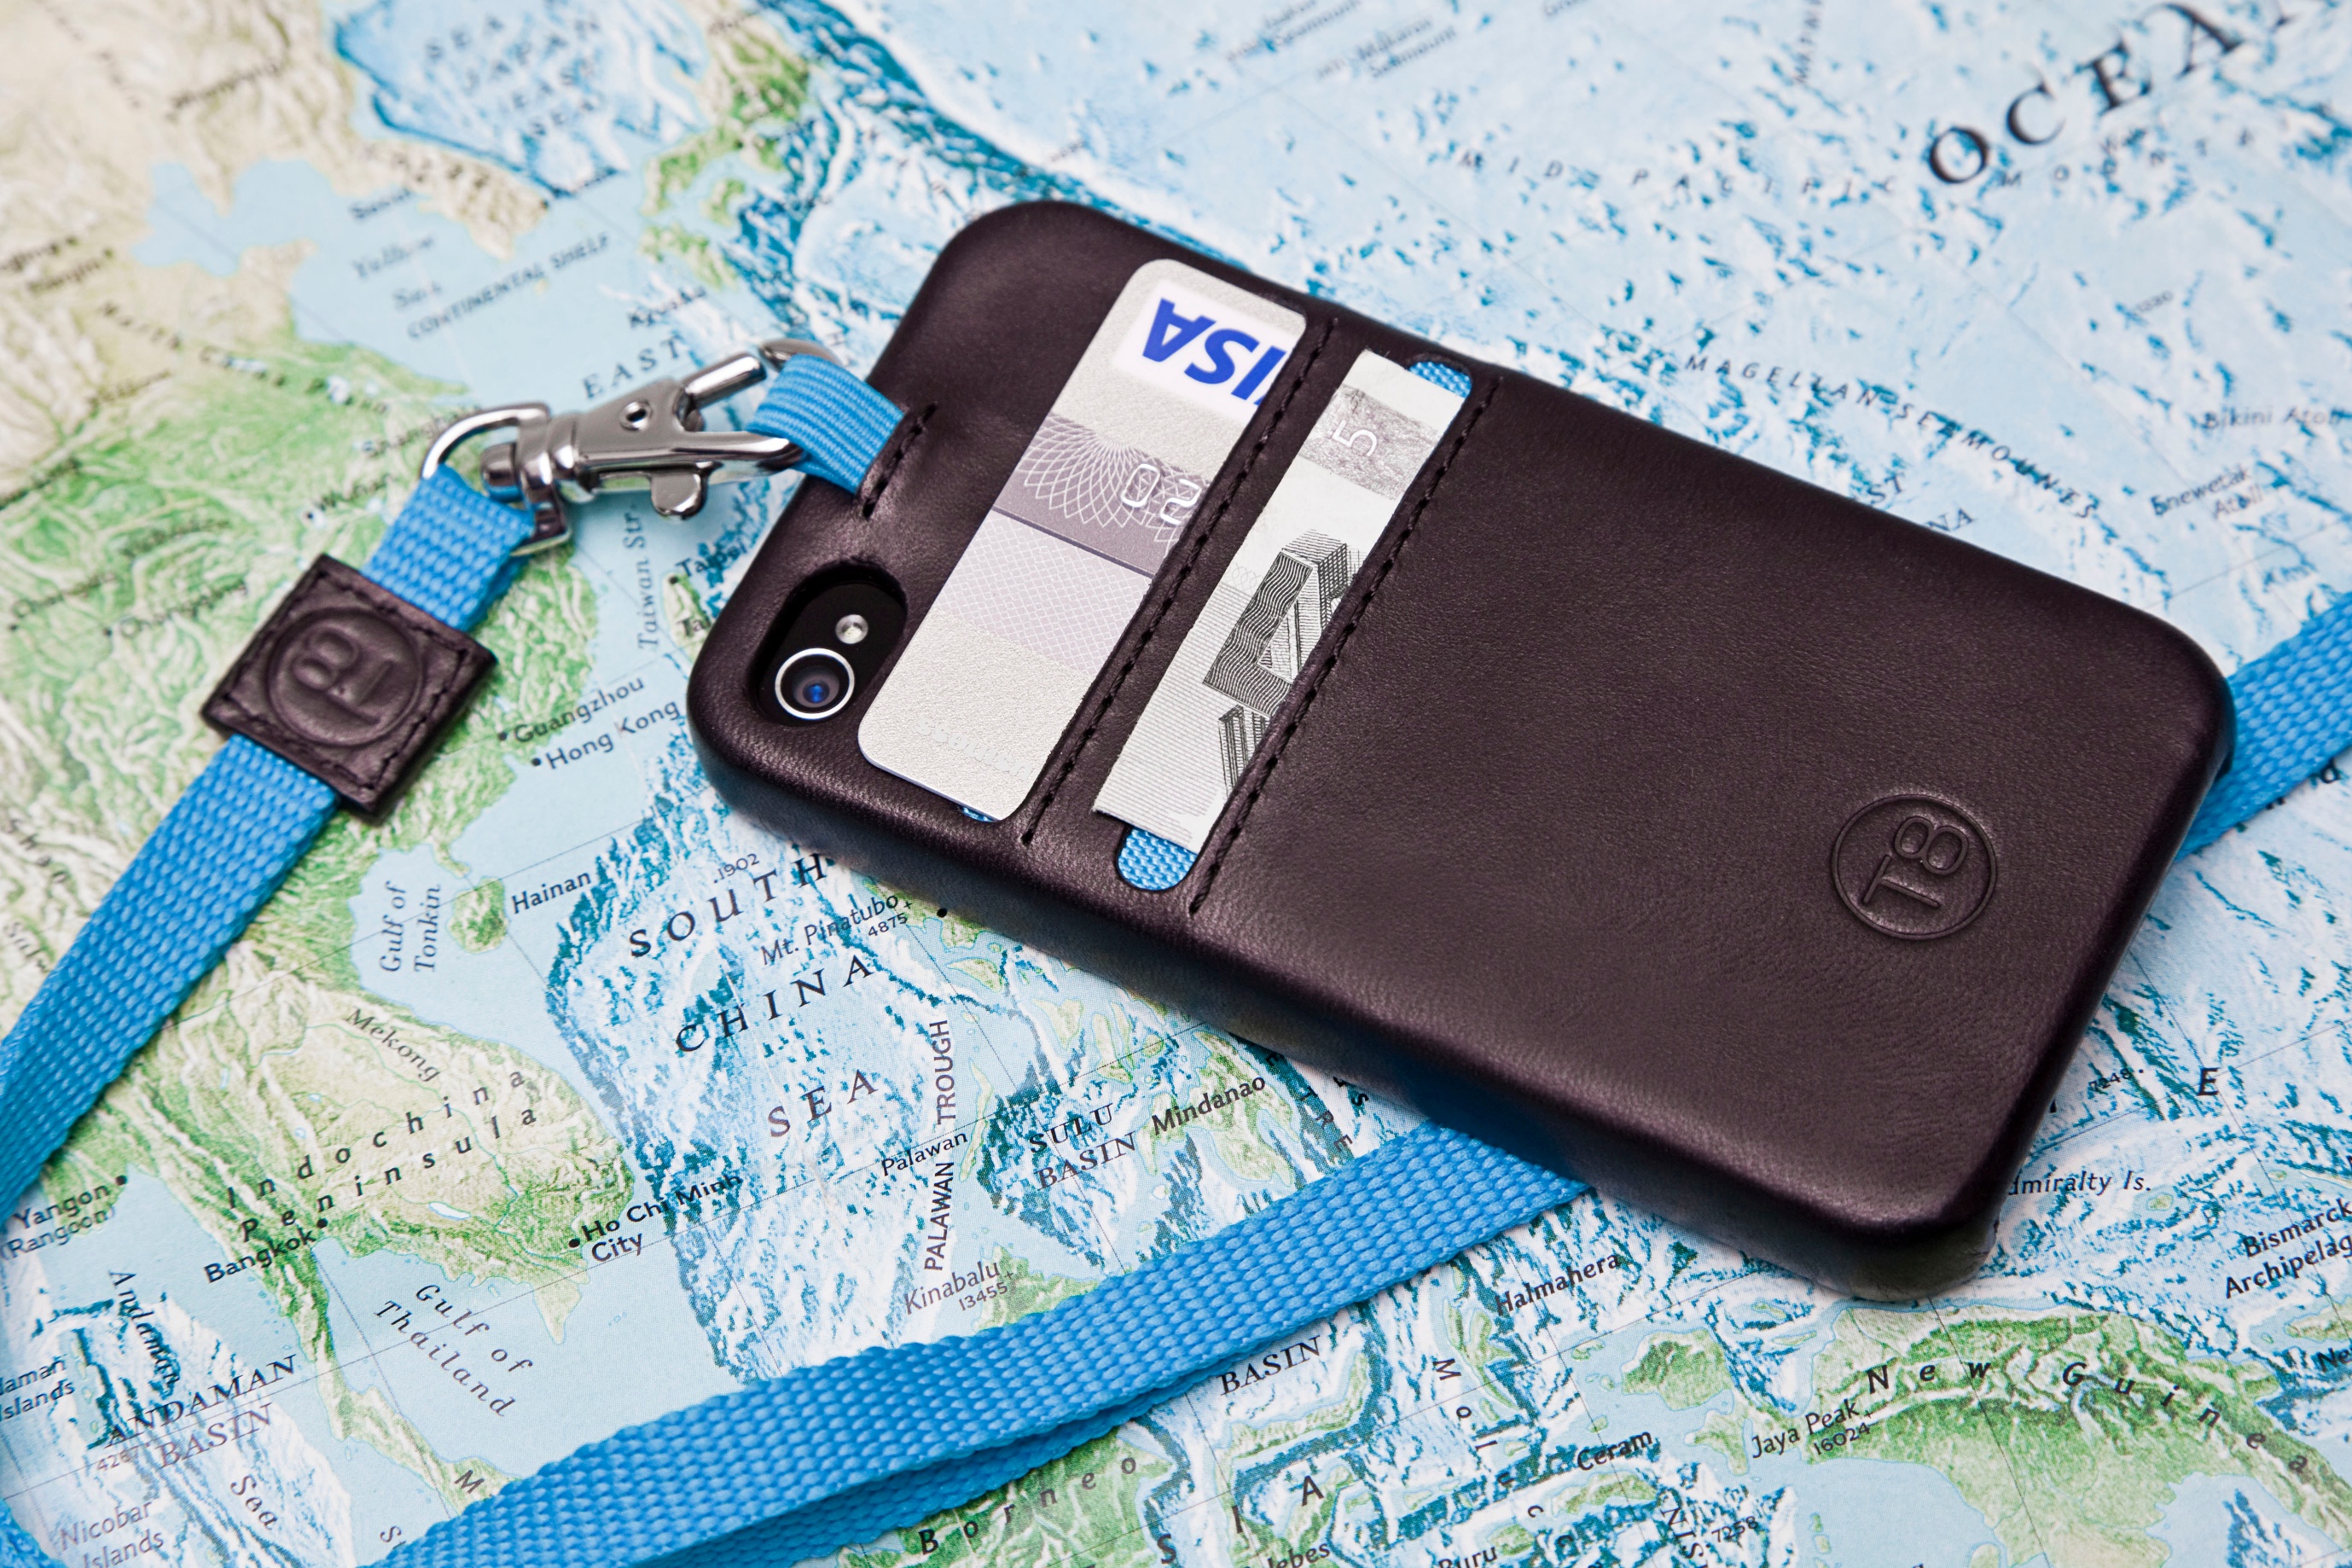 The T8 STORM iPhone 4S wallet case